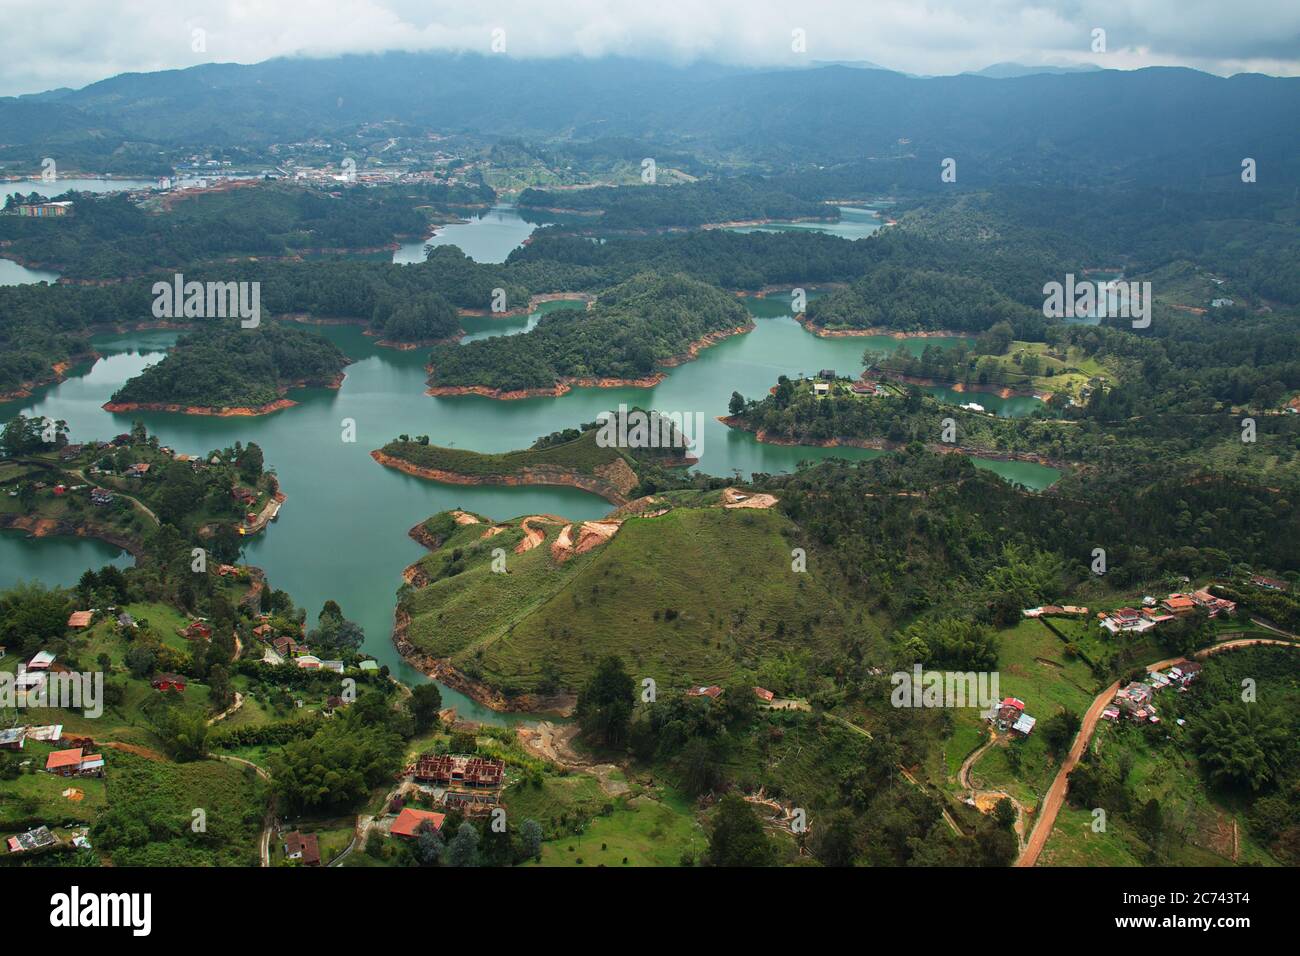 View from the summit of Stone of El Penol near Guatape in Colombia Stock Photo